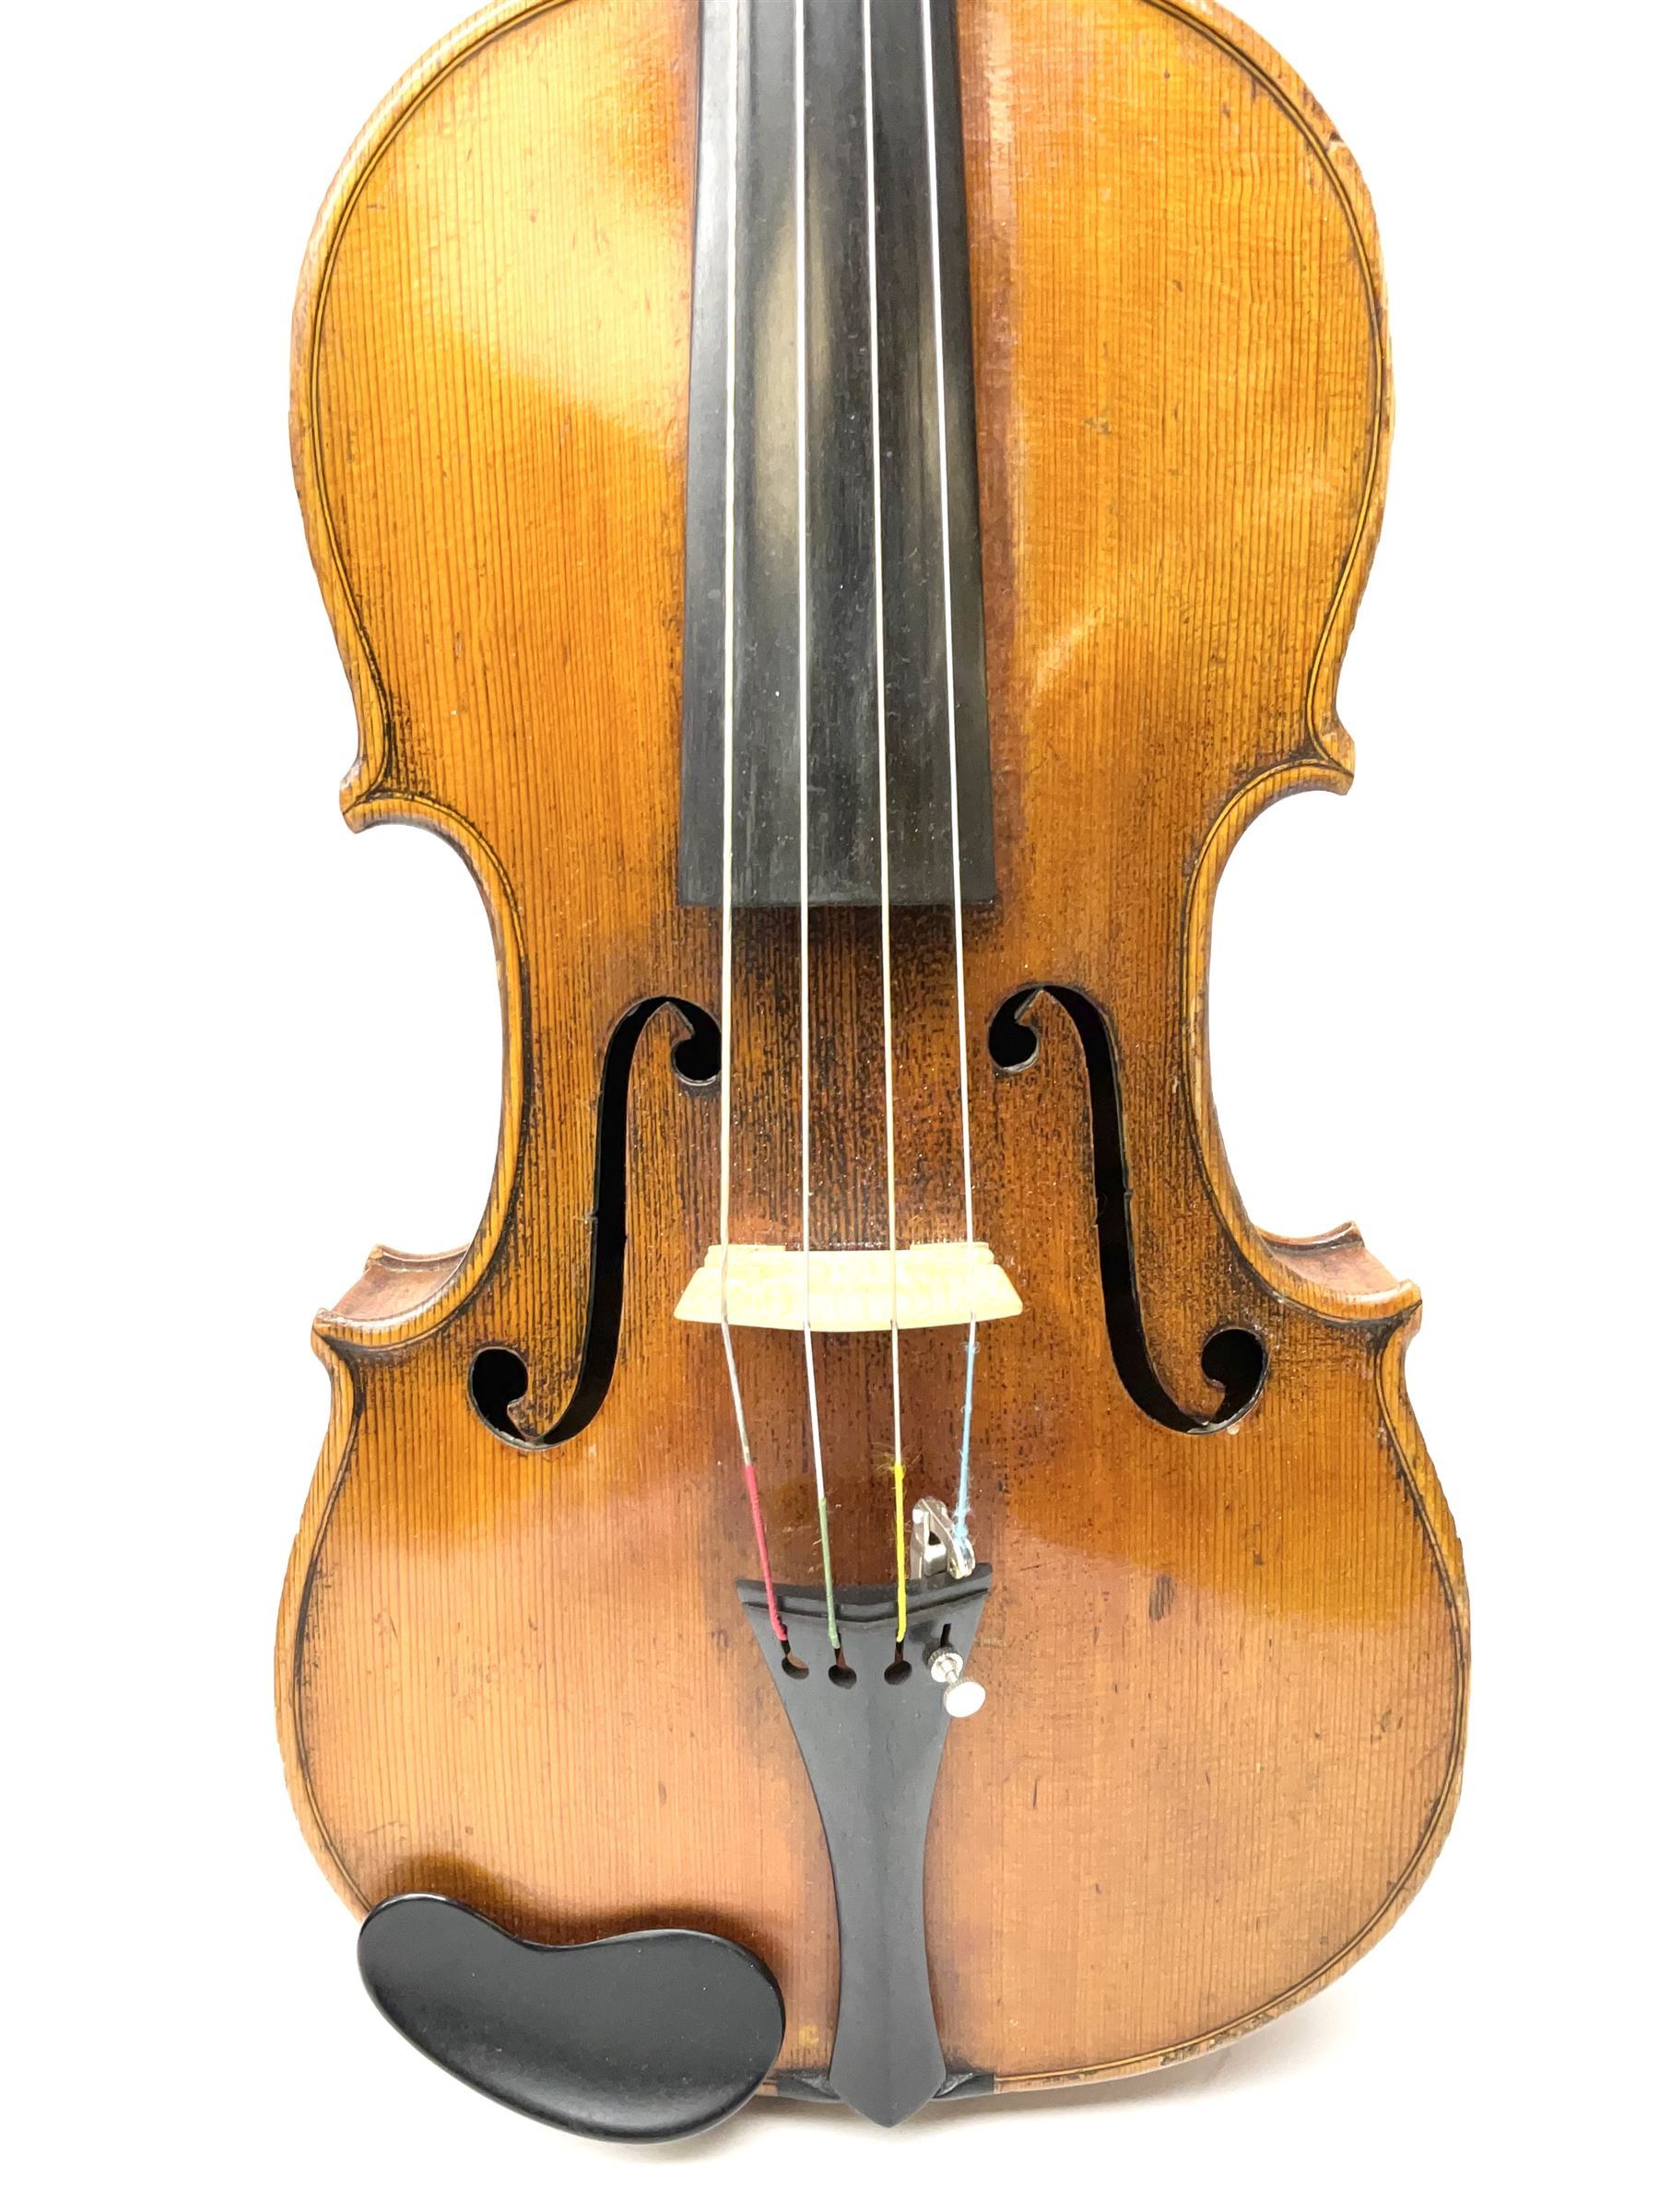 German viola c1900 with 38.5cm (15.25") two-piece maple back and ribs and spruce top - Image 3 of 21